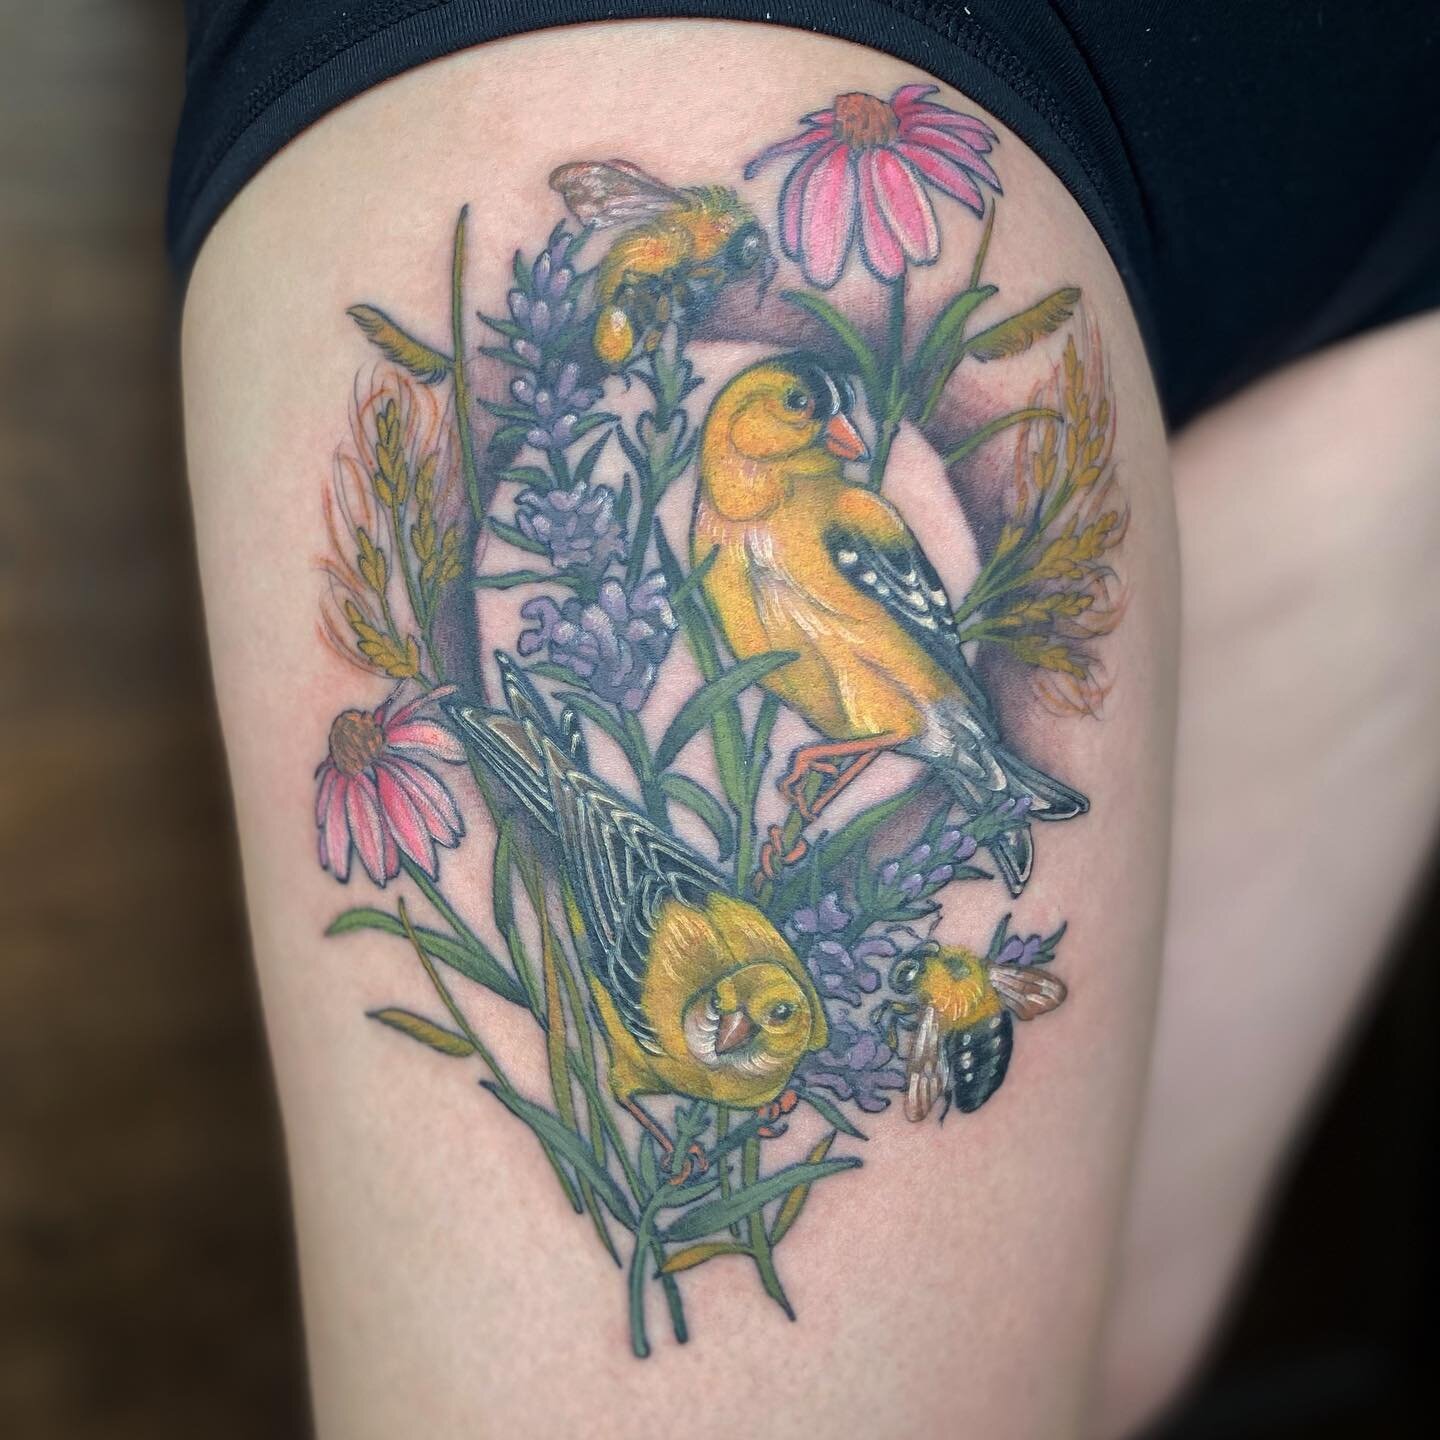 American Goldfinches for Lucy! Goldfinches can be identified by their signature &ldquo;po-ta-to chip&rdquo; call, and their Latin genus name &ldquo;Caruelis&rdquo; comes from the word for thistle, a primary food source for them. Thanks so much Lucy! 